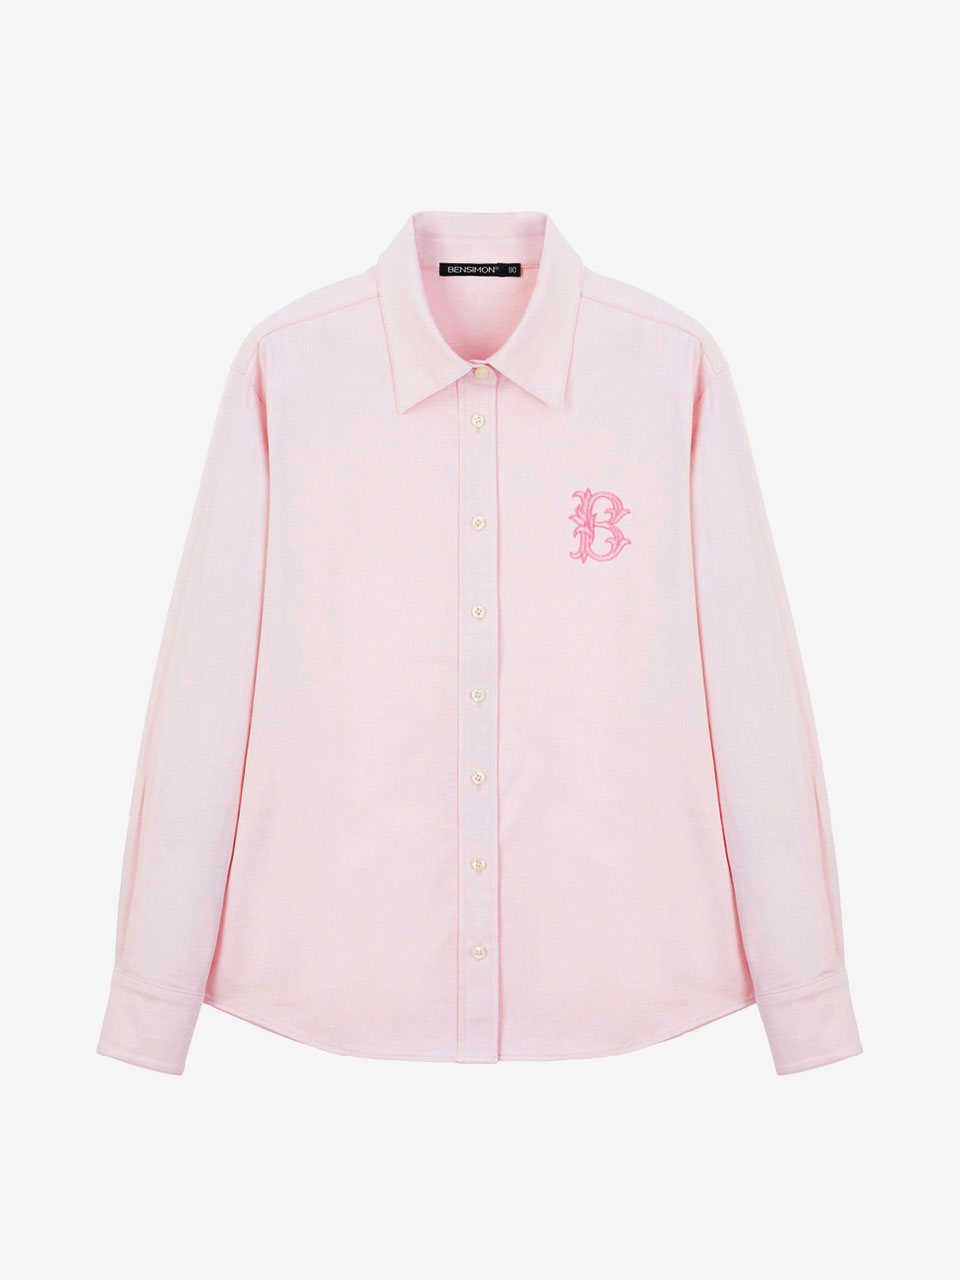 [LIMITED] OXFORTD SHIRT (FOR WOMEN) - PINK